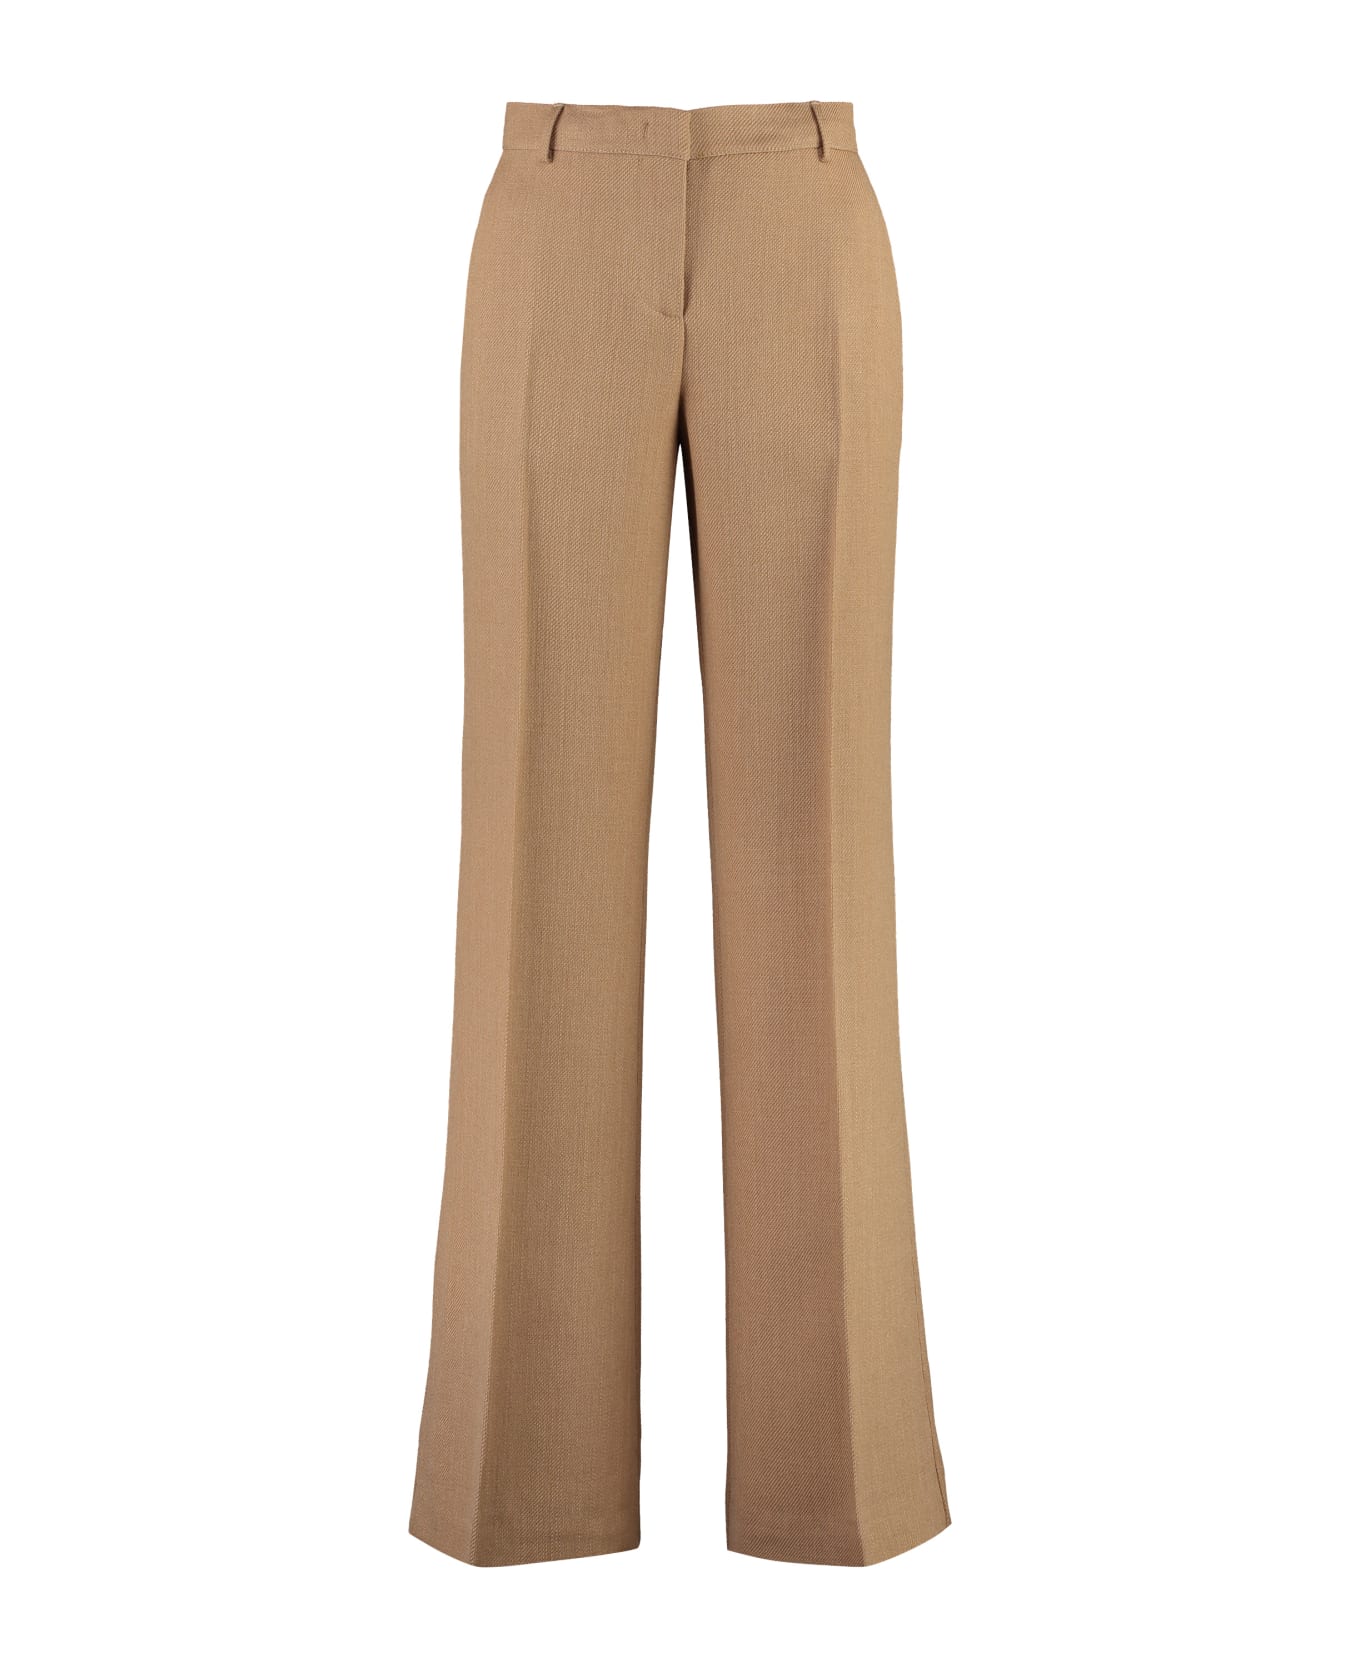 Etro Flared Trousers - Beige ボトムス